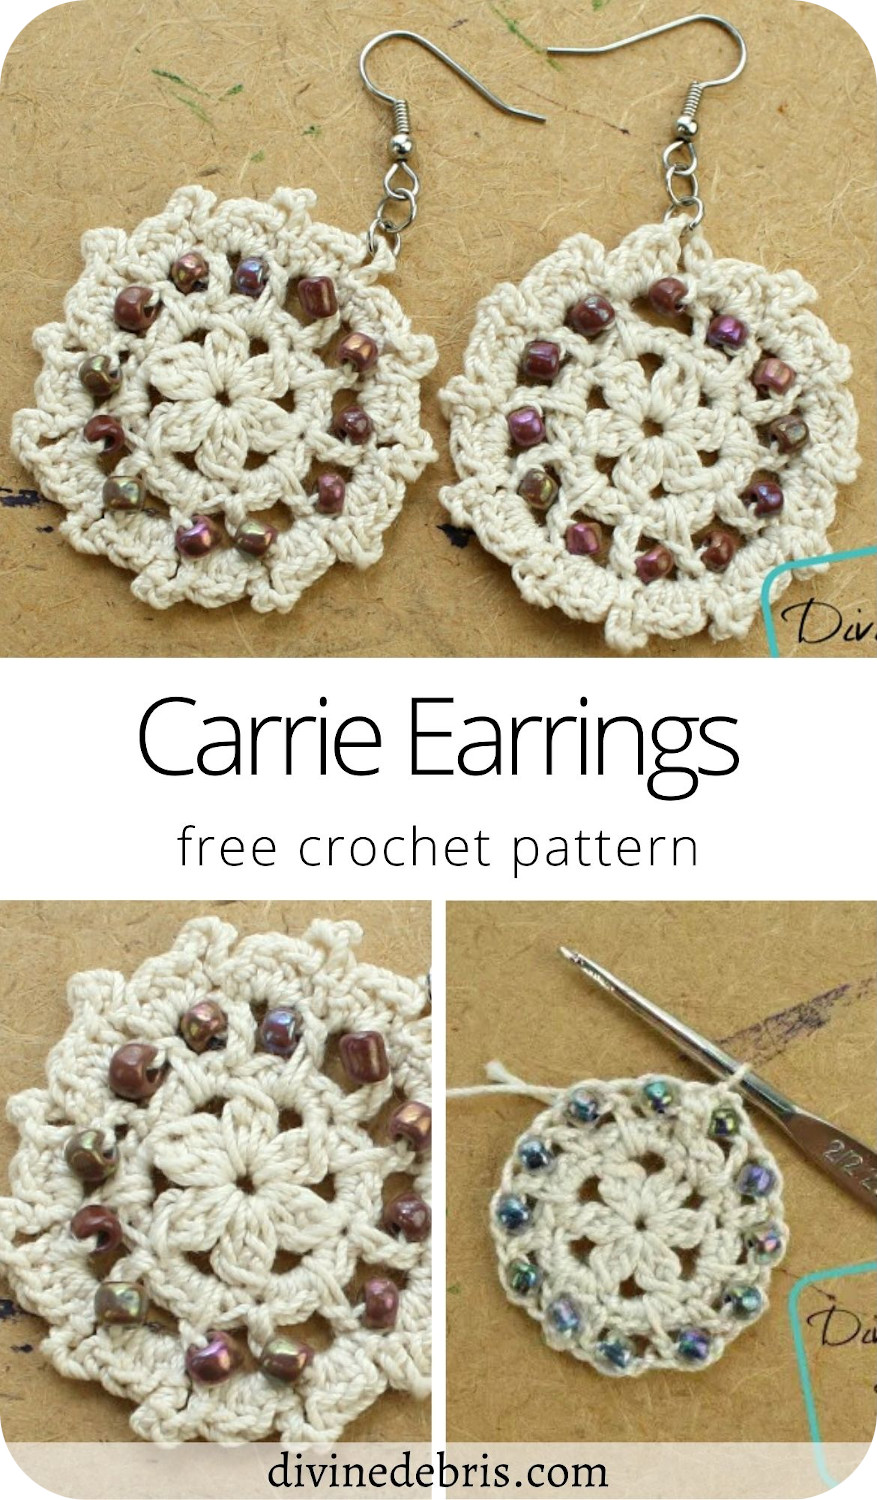 Learn to make the Carrie Earrings, a free and fun crochet earring pattern featuring fun texture and seed beads, from DivineDebris.com